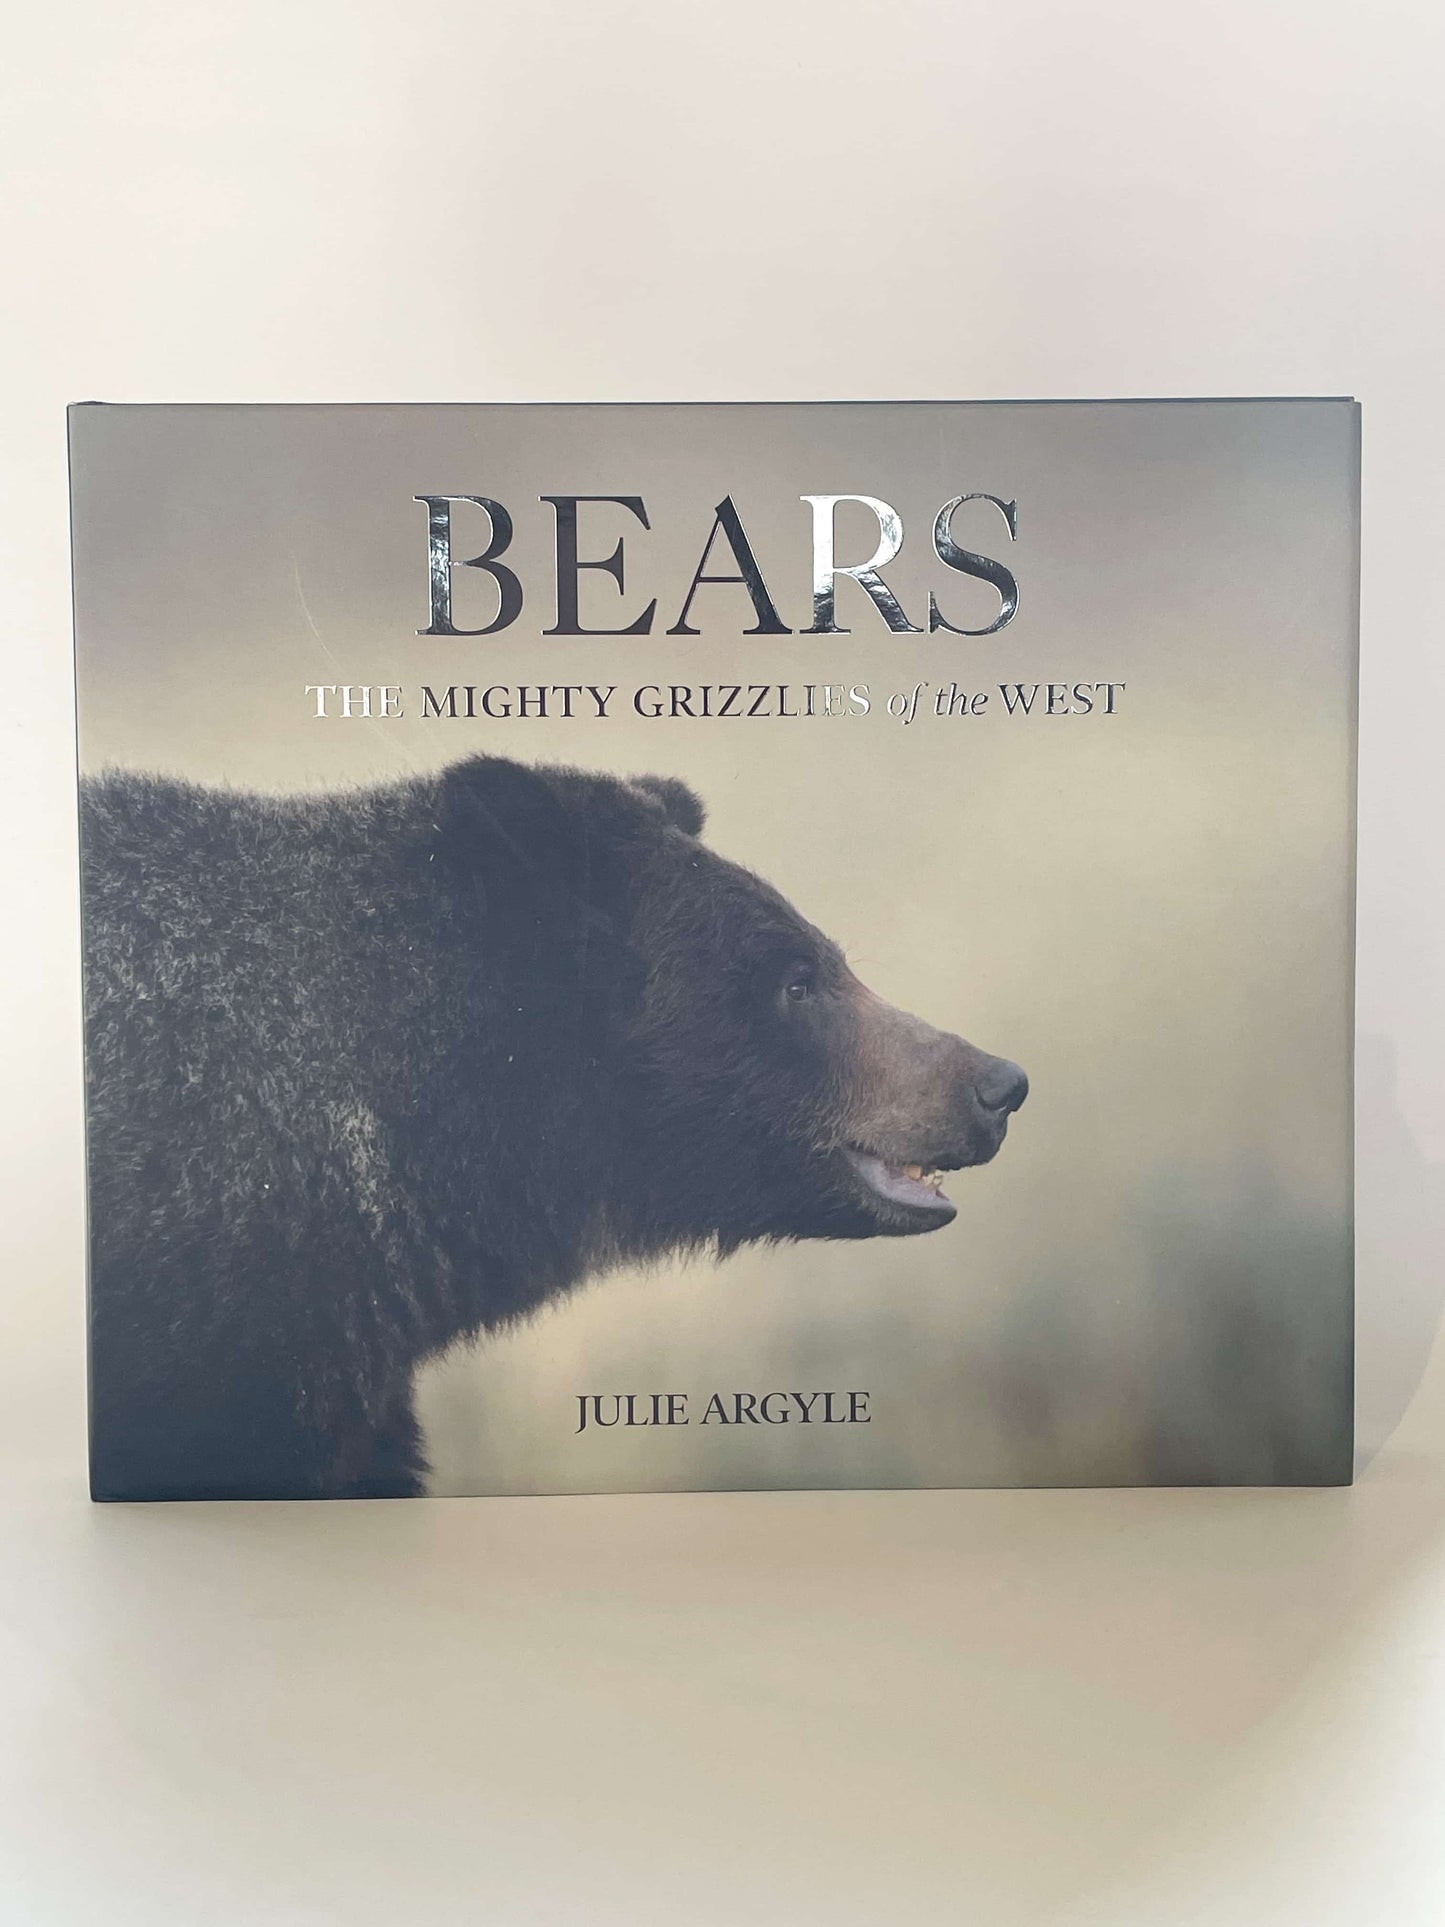 Bears: the mighty grizzly of the west book